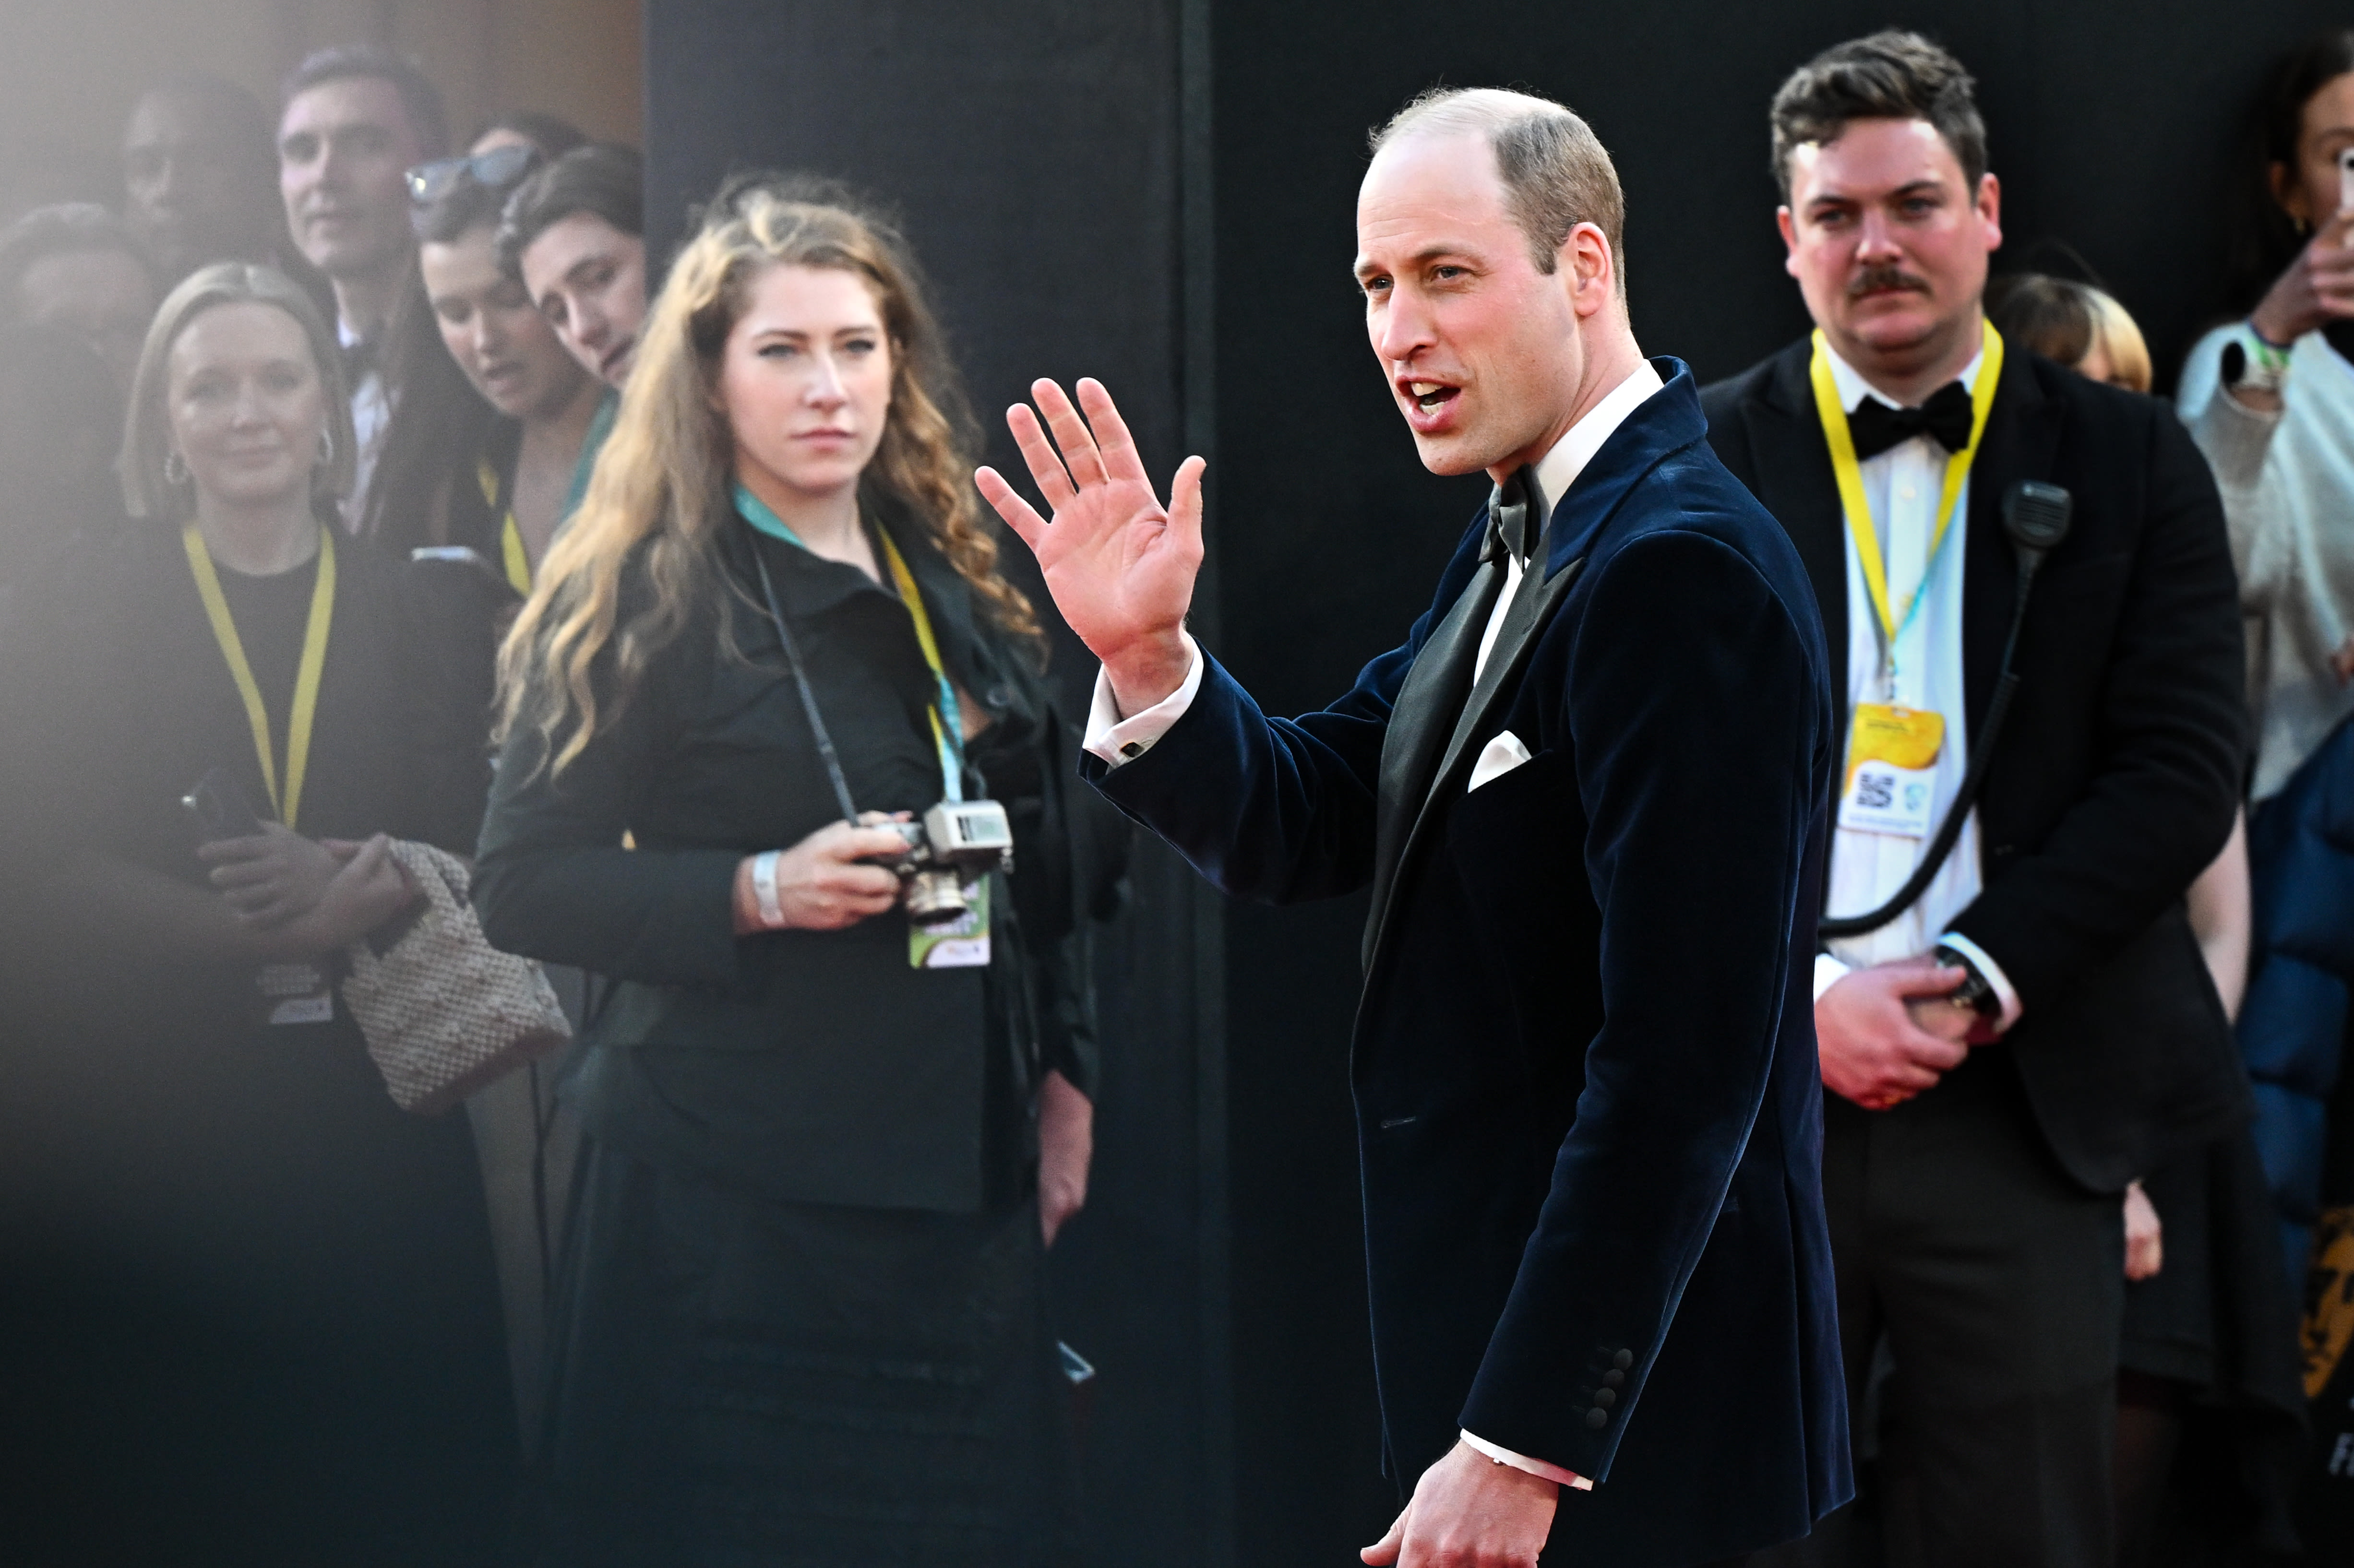 ...William & Kate Middleton Will Not Attend Sunday’s BAFTA TV Awards; BAFTA President William To Record Video Message...